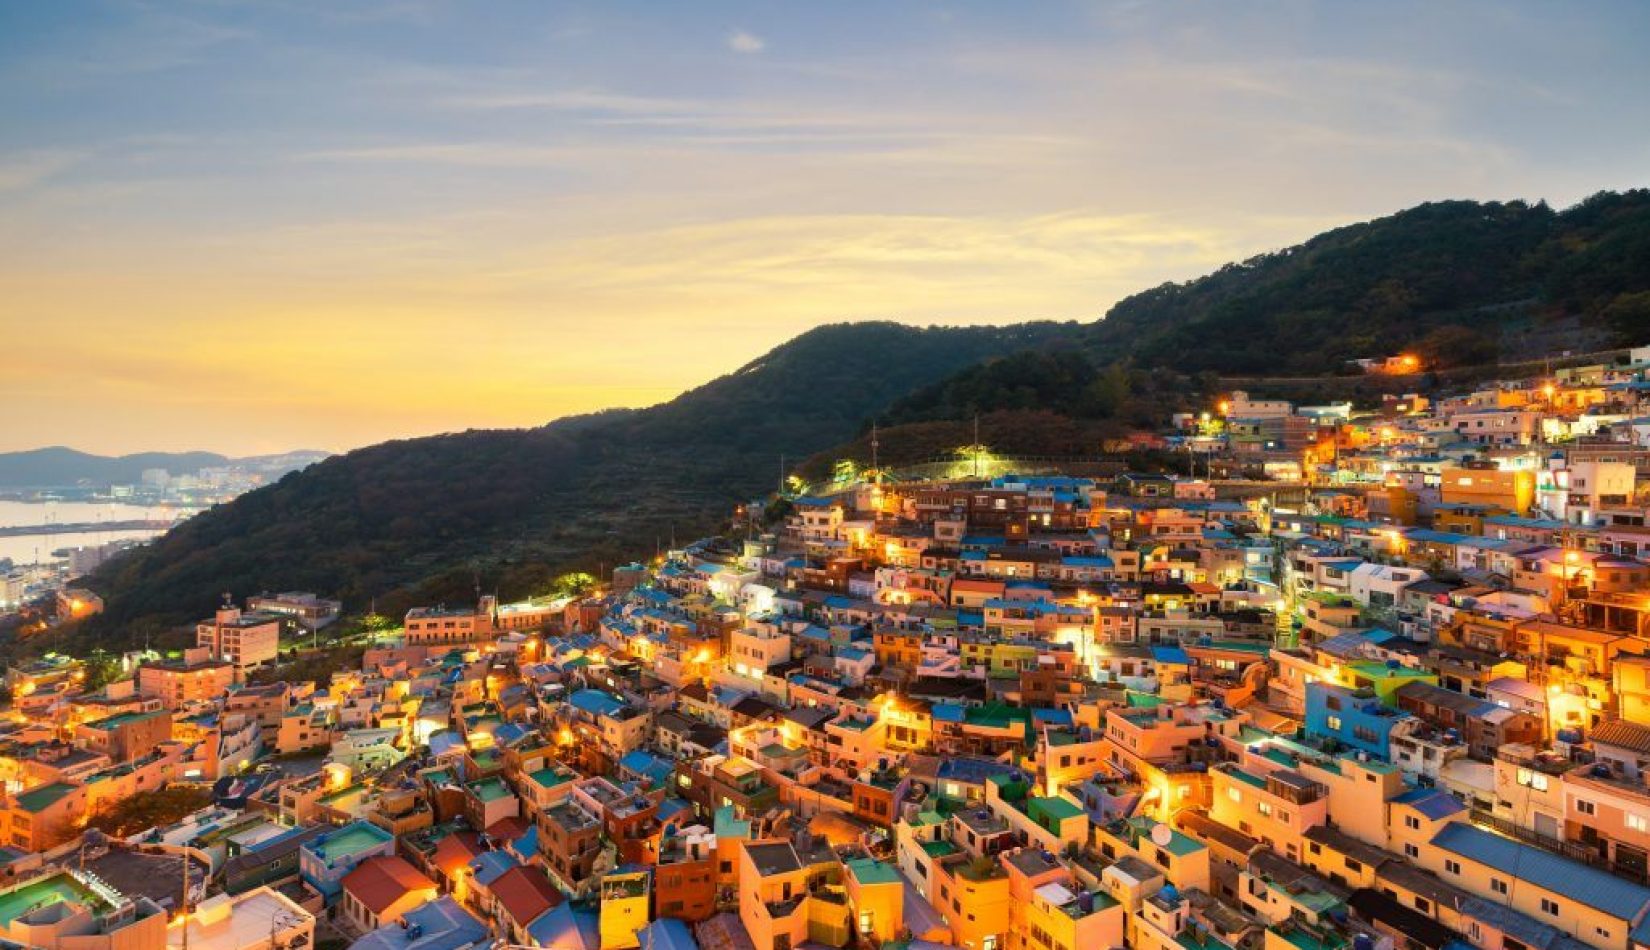 Panorama view of Gamcheon Culture Village located in Busan city